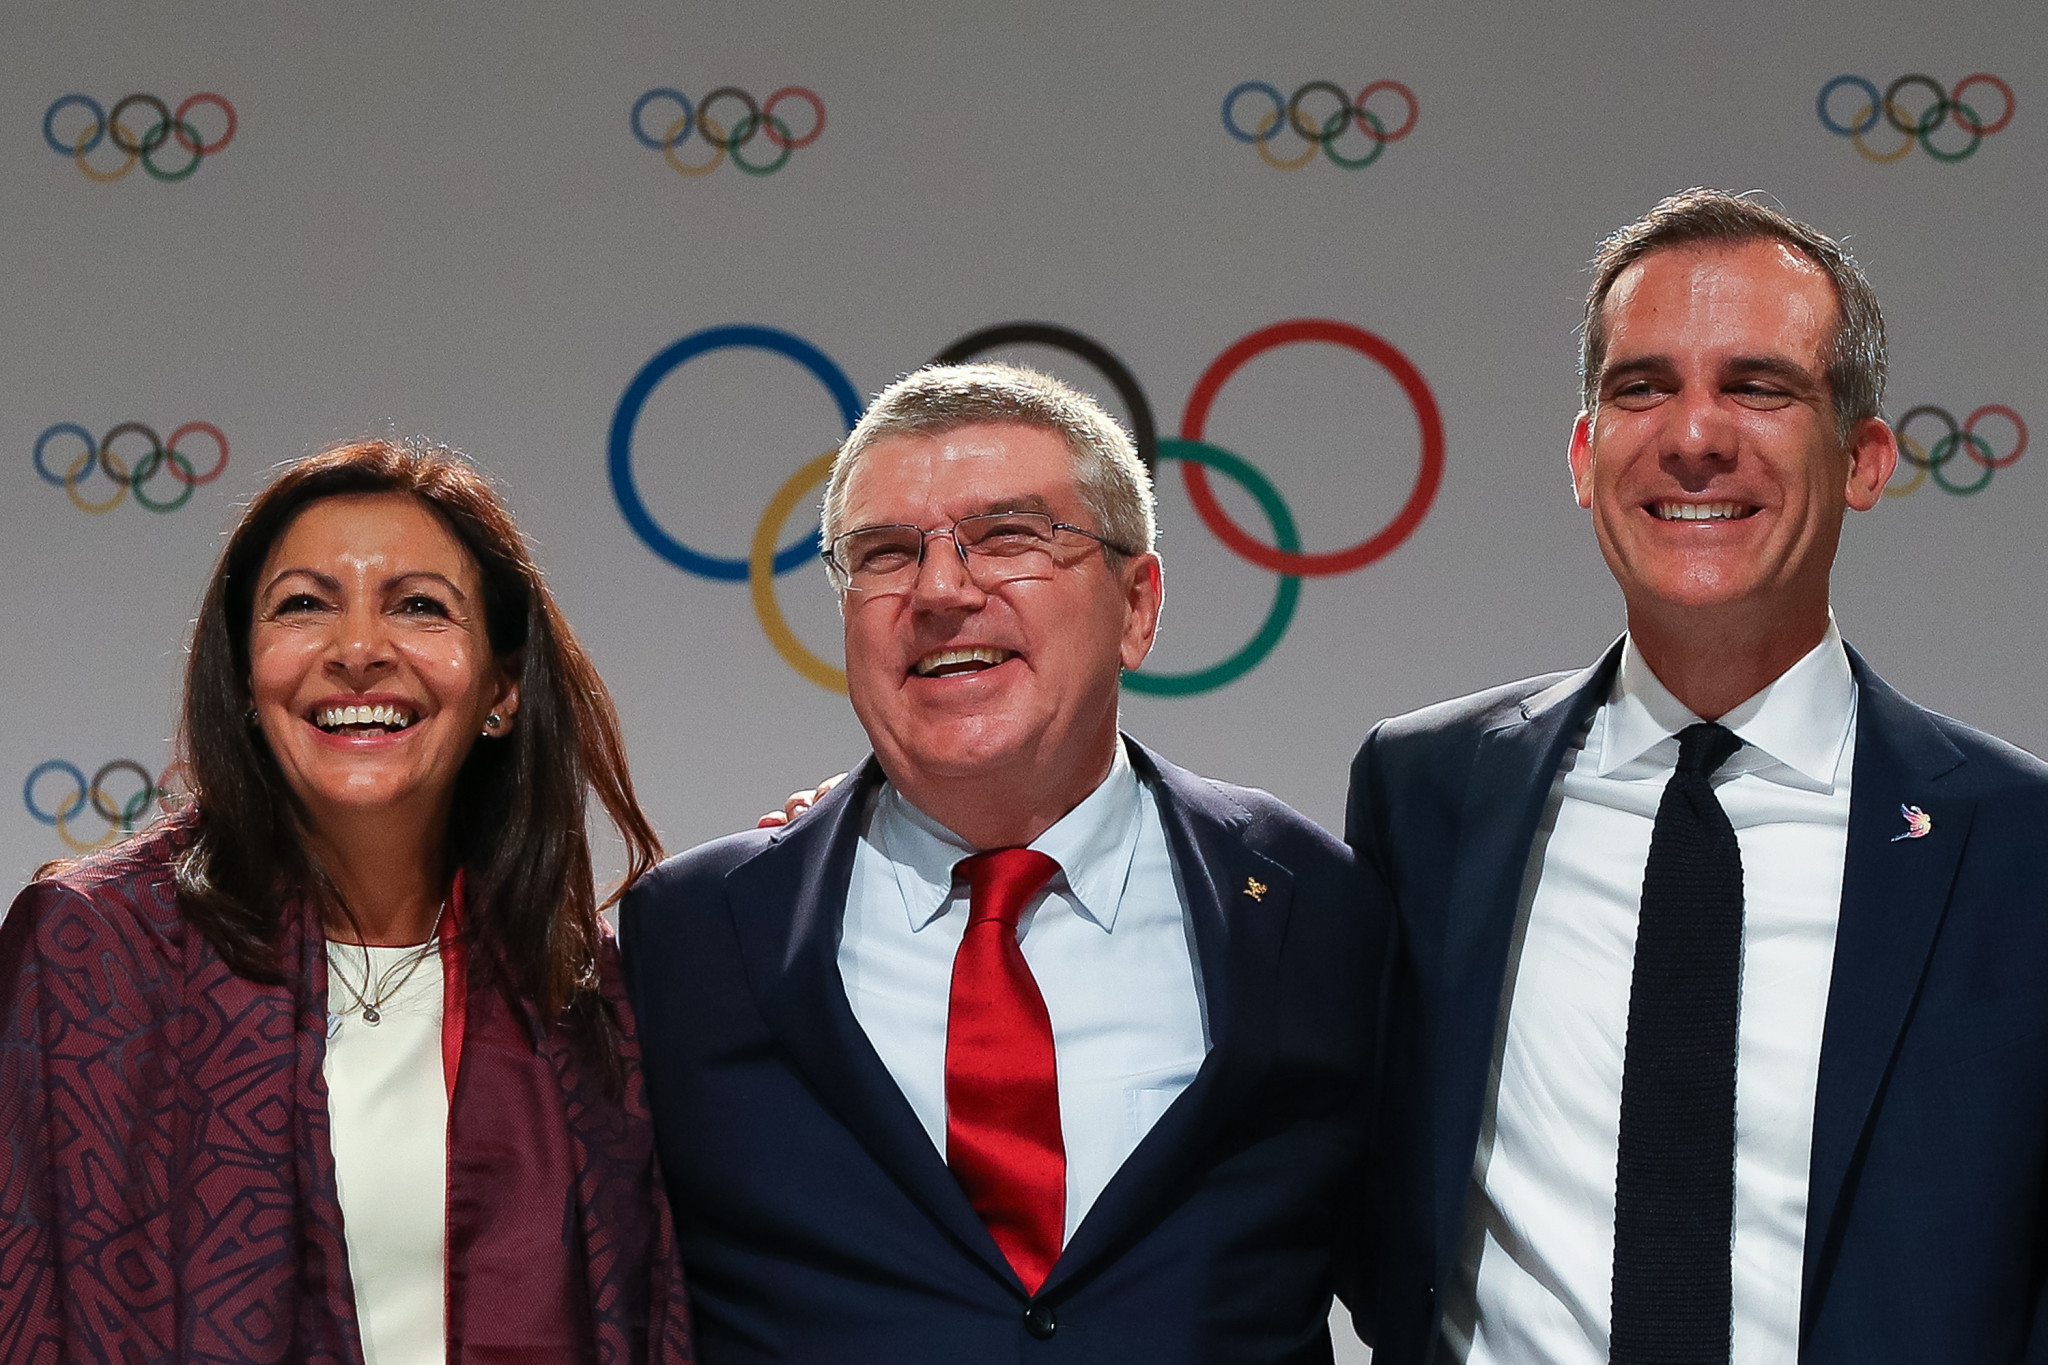 Anne Hidalgo, left, and Eric Garcetti, right, pictured either side of IOC President Thomas Bach ©Getty Images